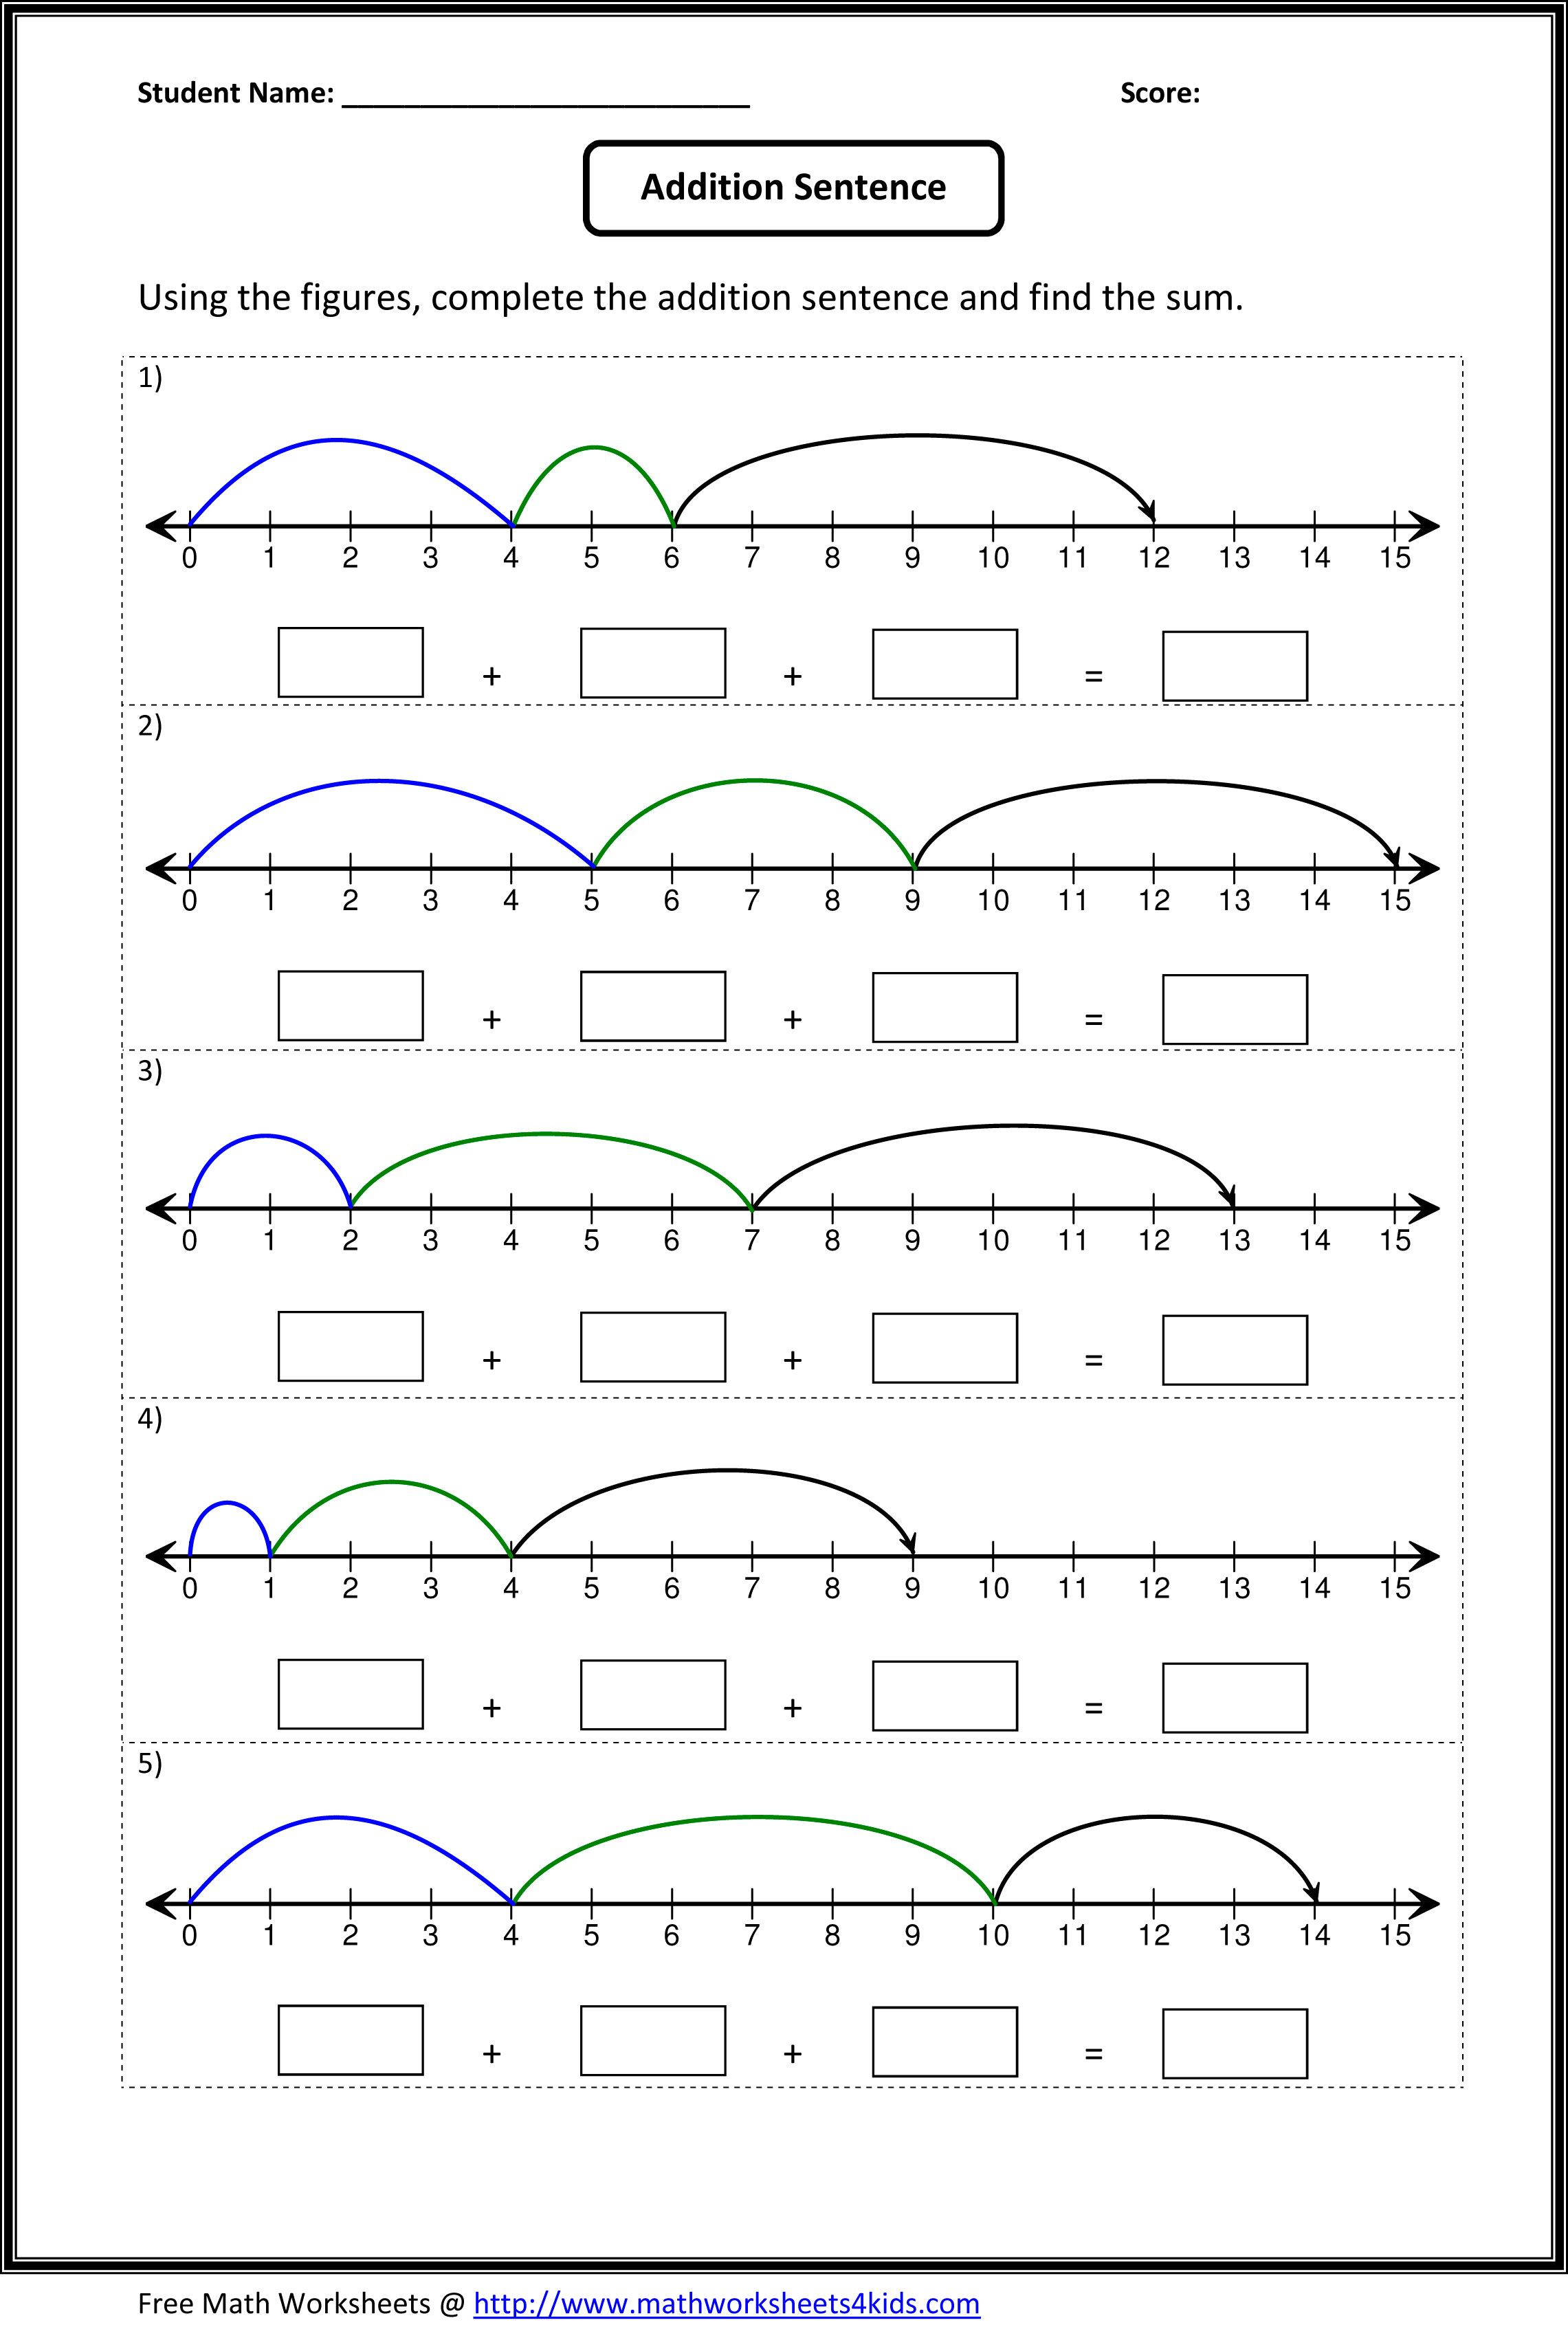 Printable 1 100 Number Line For Kids And Students Free Printable Number Line Worksheets